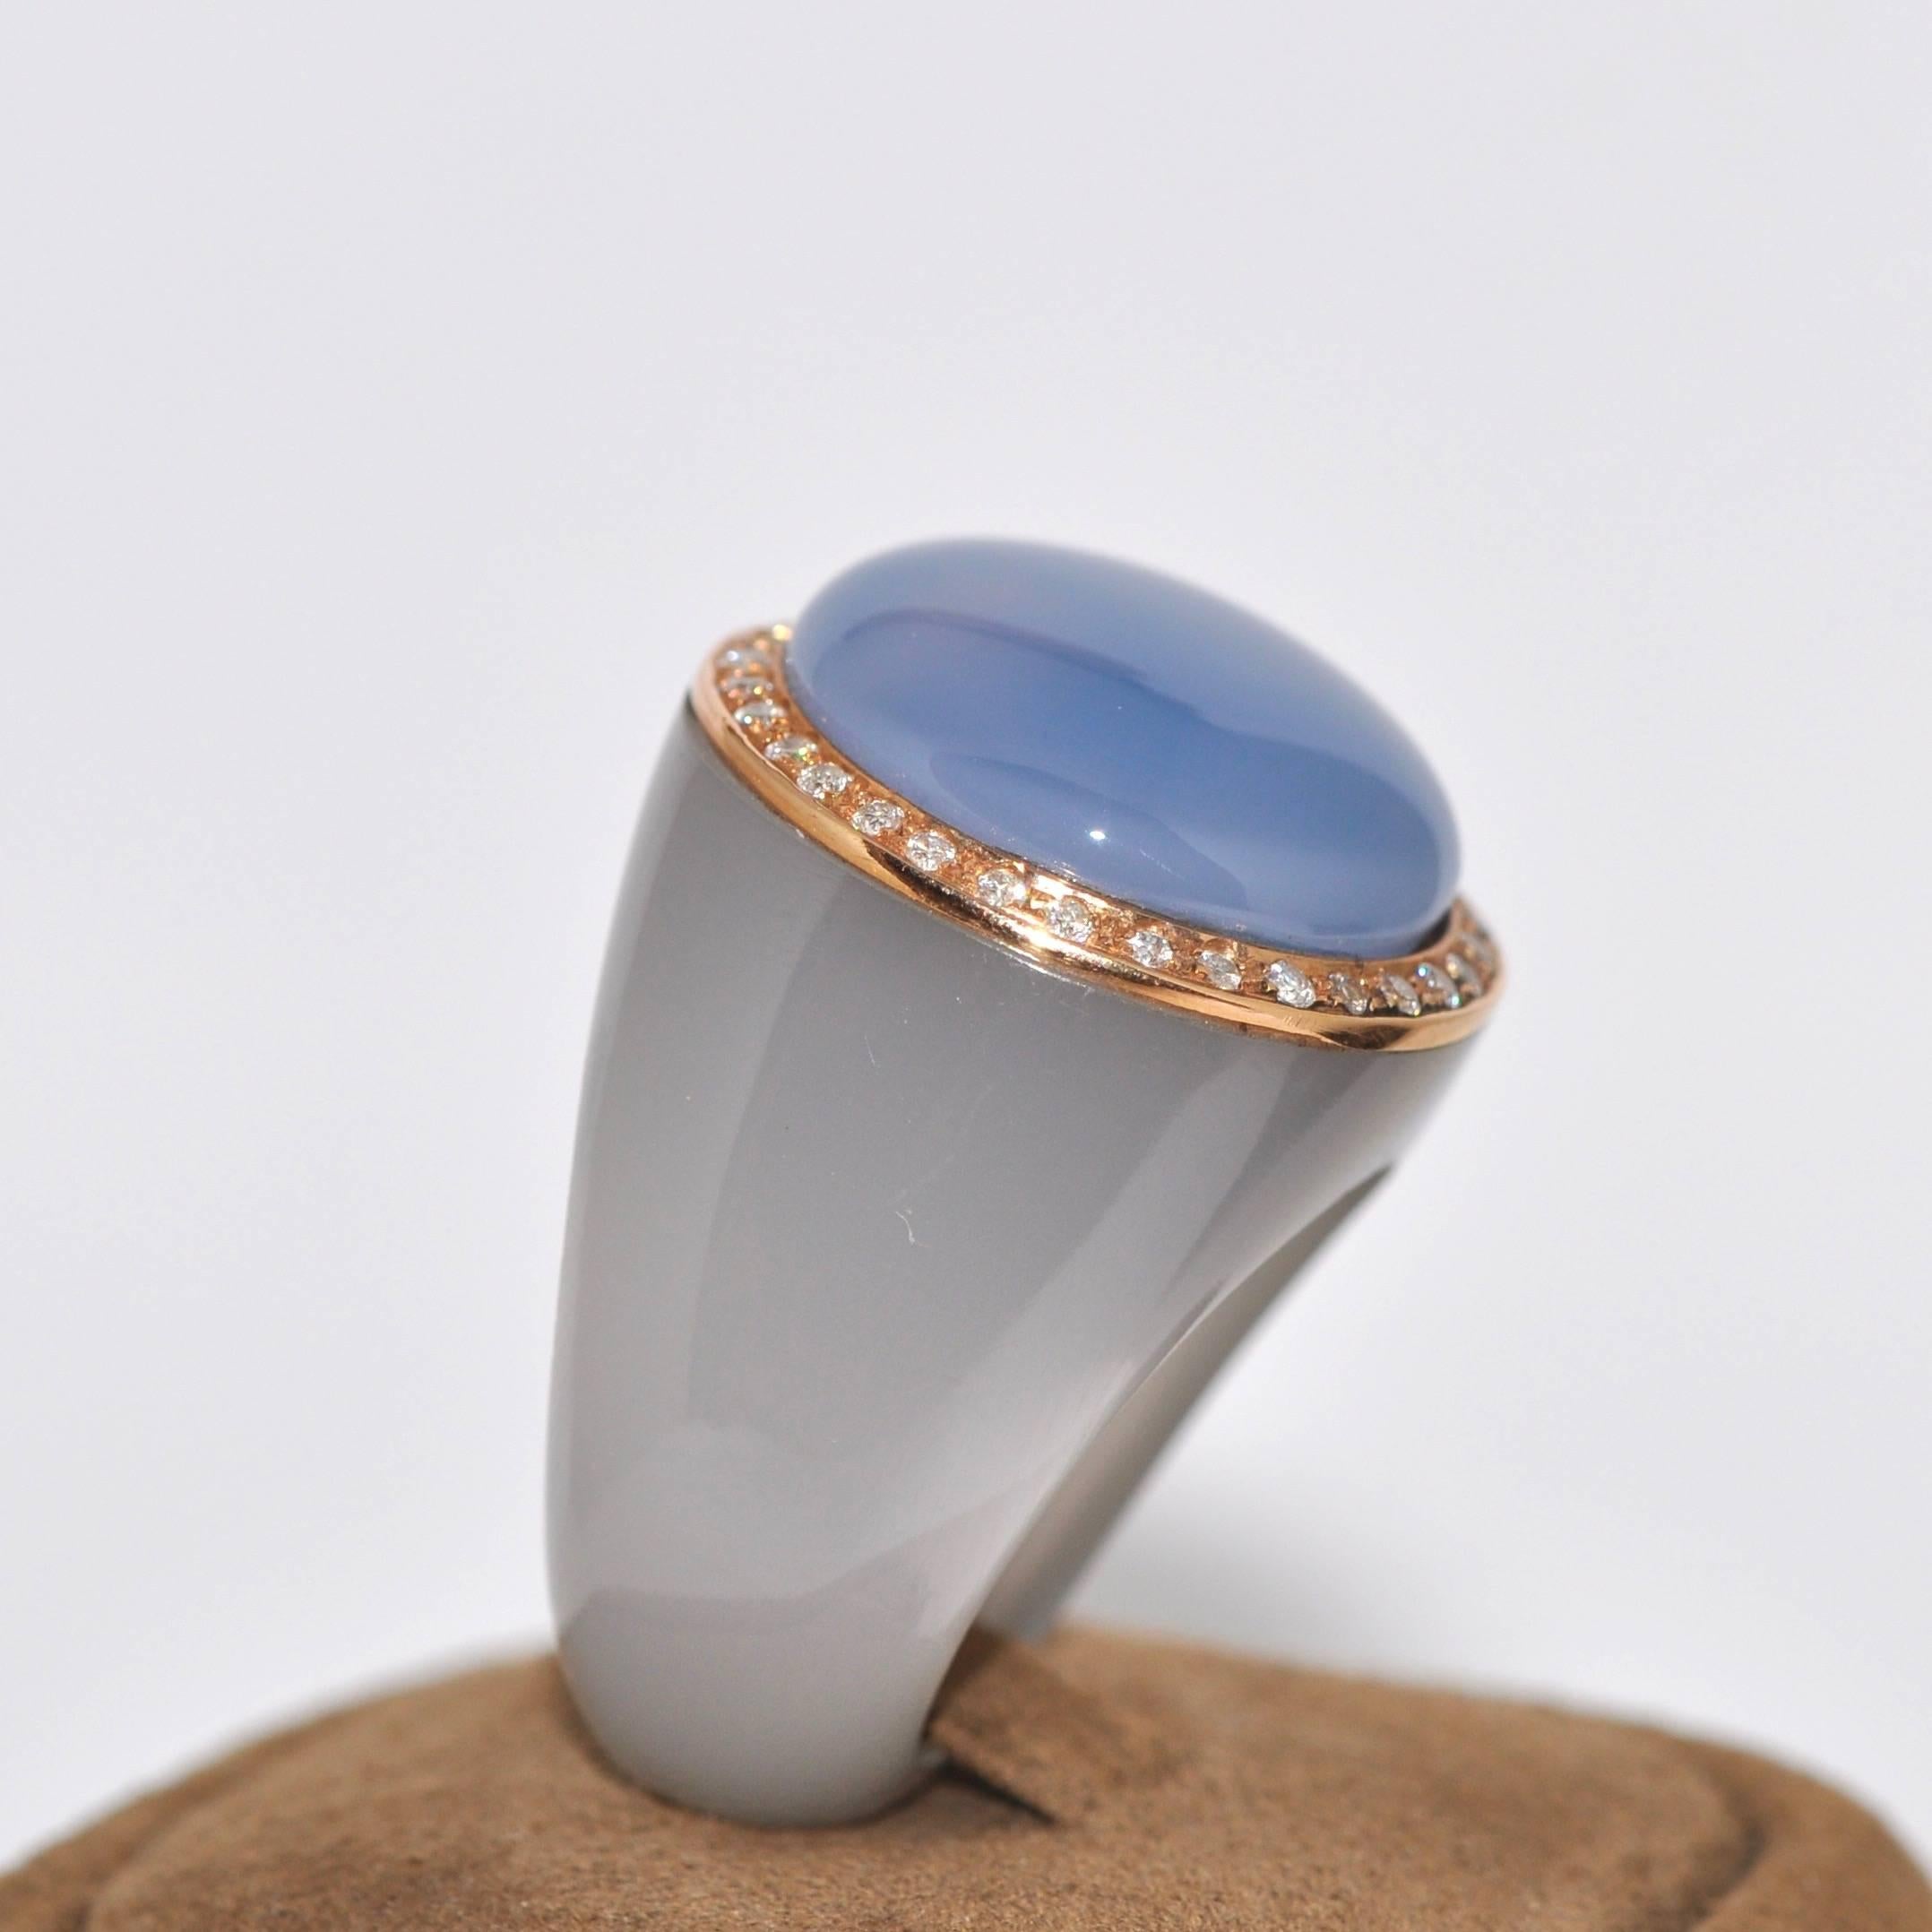 Chalcedony, a semi-precious stone with delicate nuances, adds a subtle, soothing touch of color to this unique piece. Its soft tone and subtle transparency create a soothing, sophisticated aesthetic, captivating the eye with its natural